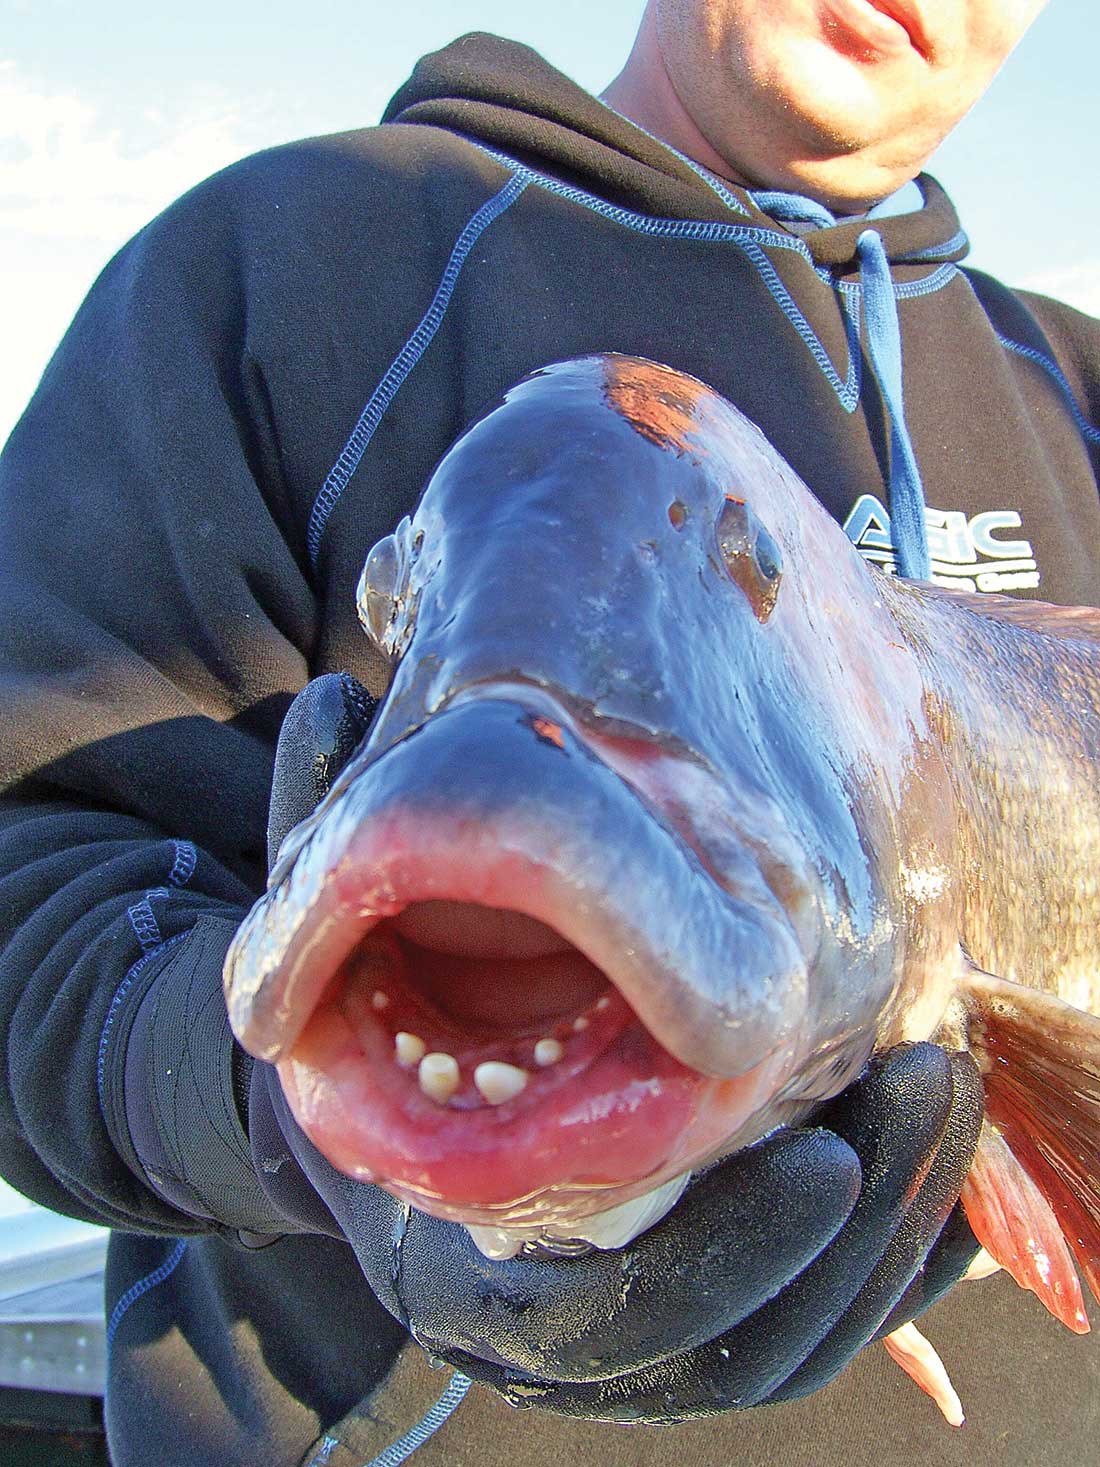 A tautog’s teeth are designed for crushing shellfish and mussels